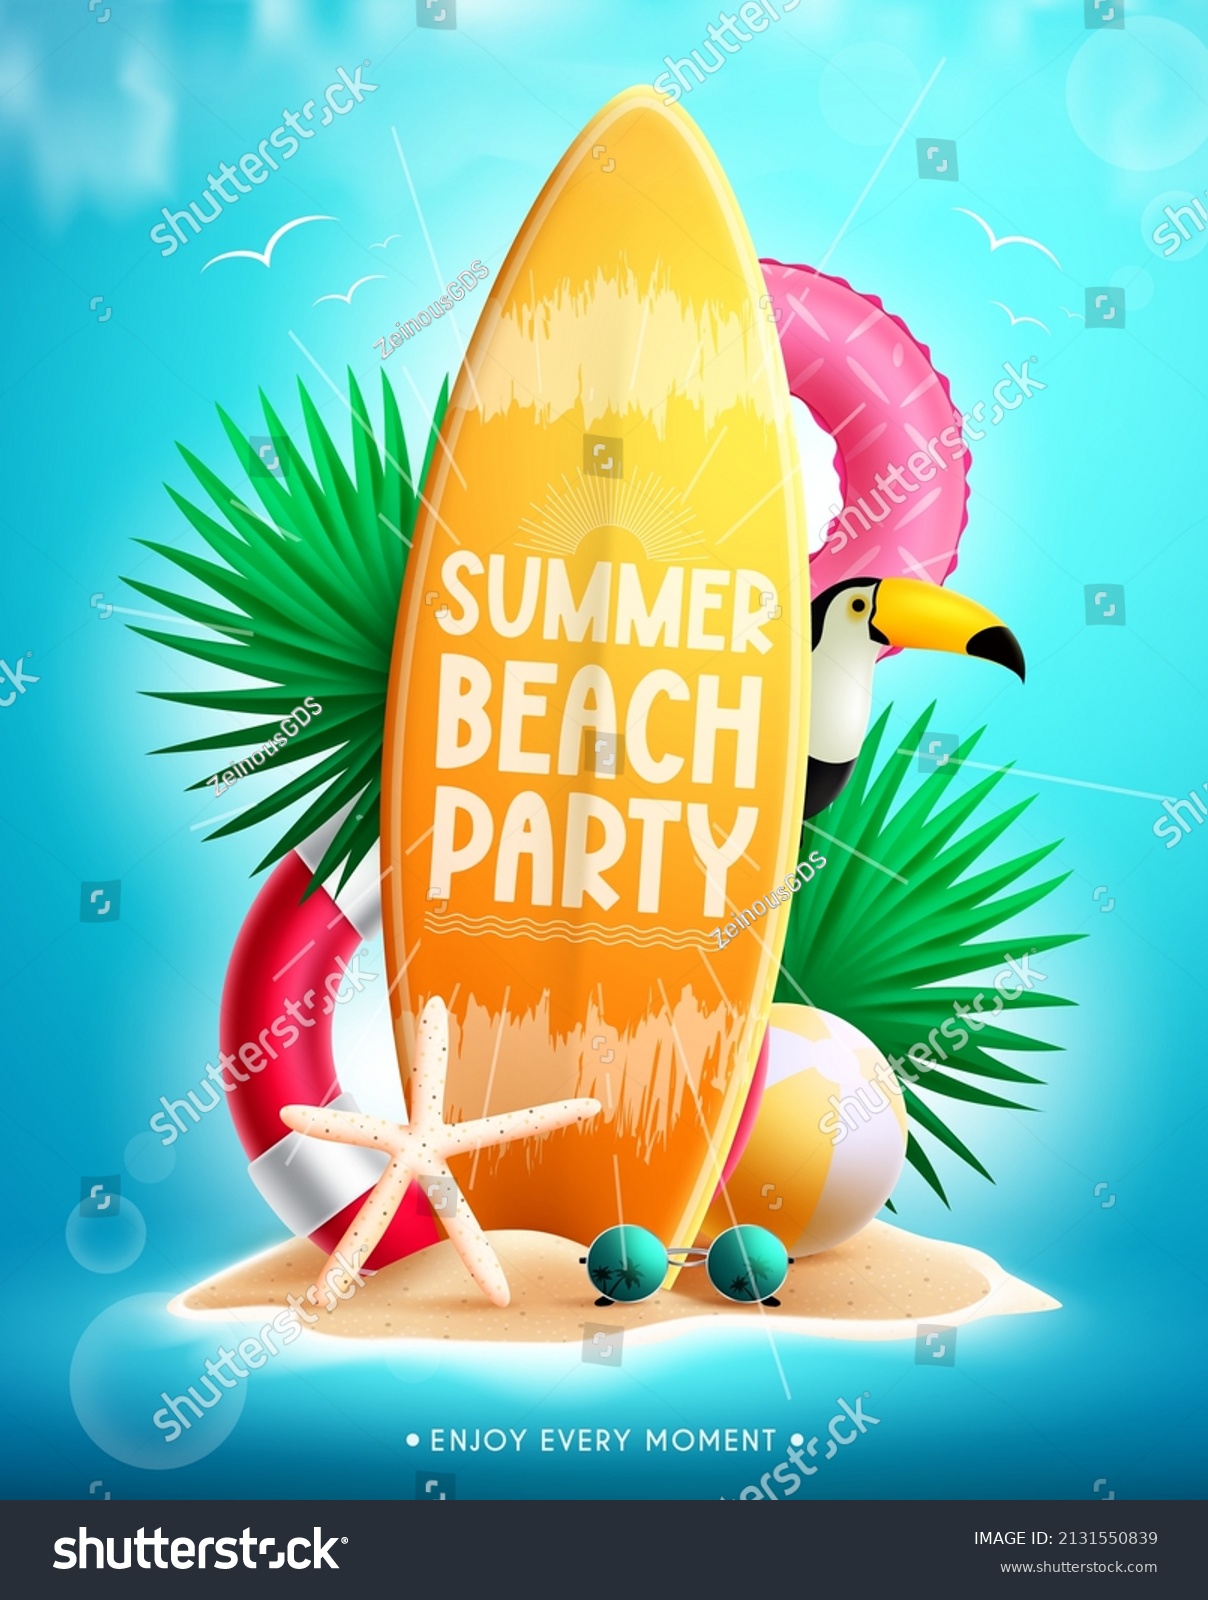 Summer beach vector concept design. Summer beach party text in surfboard element with floaters, leaves and miniature island for tropical holiday decoration. Vector illustration.
 #2131550839